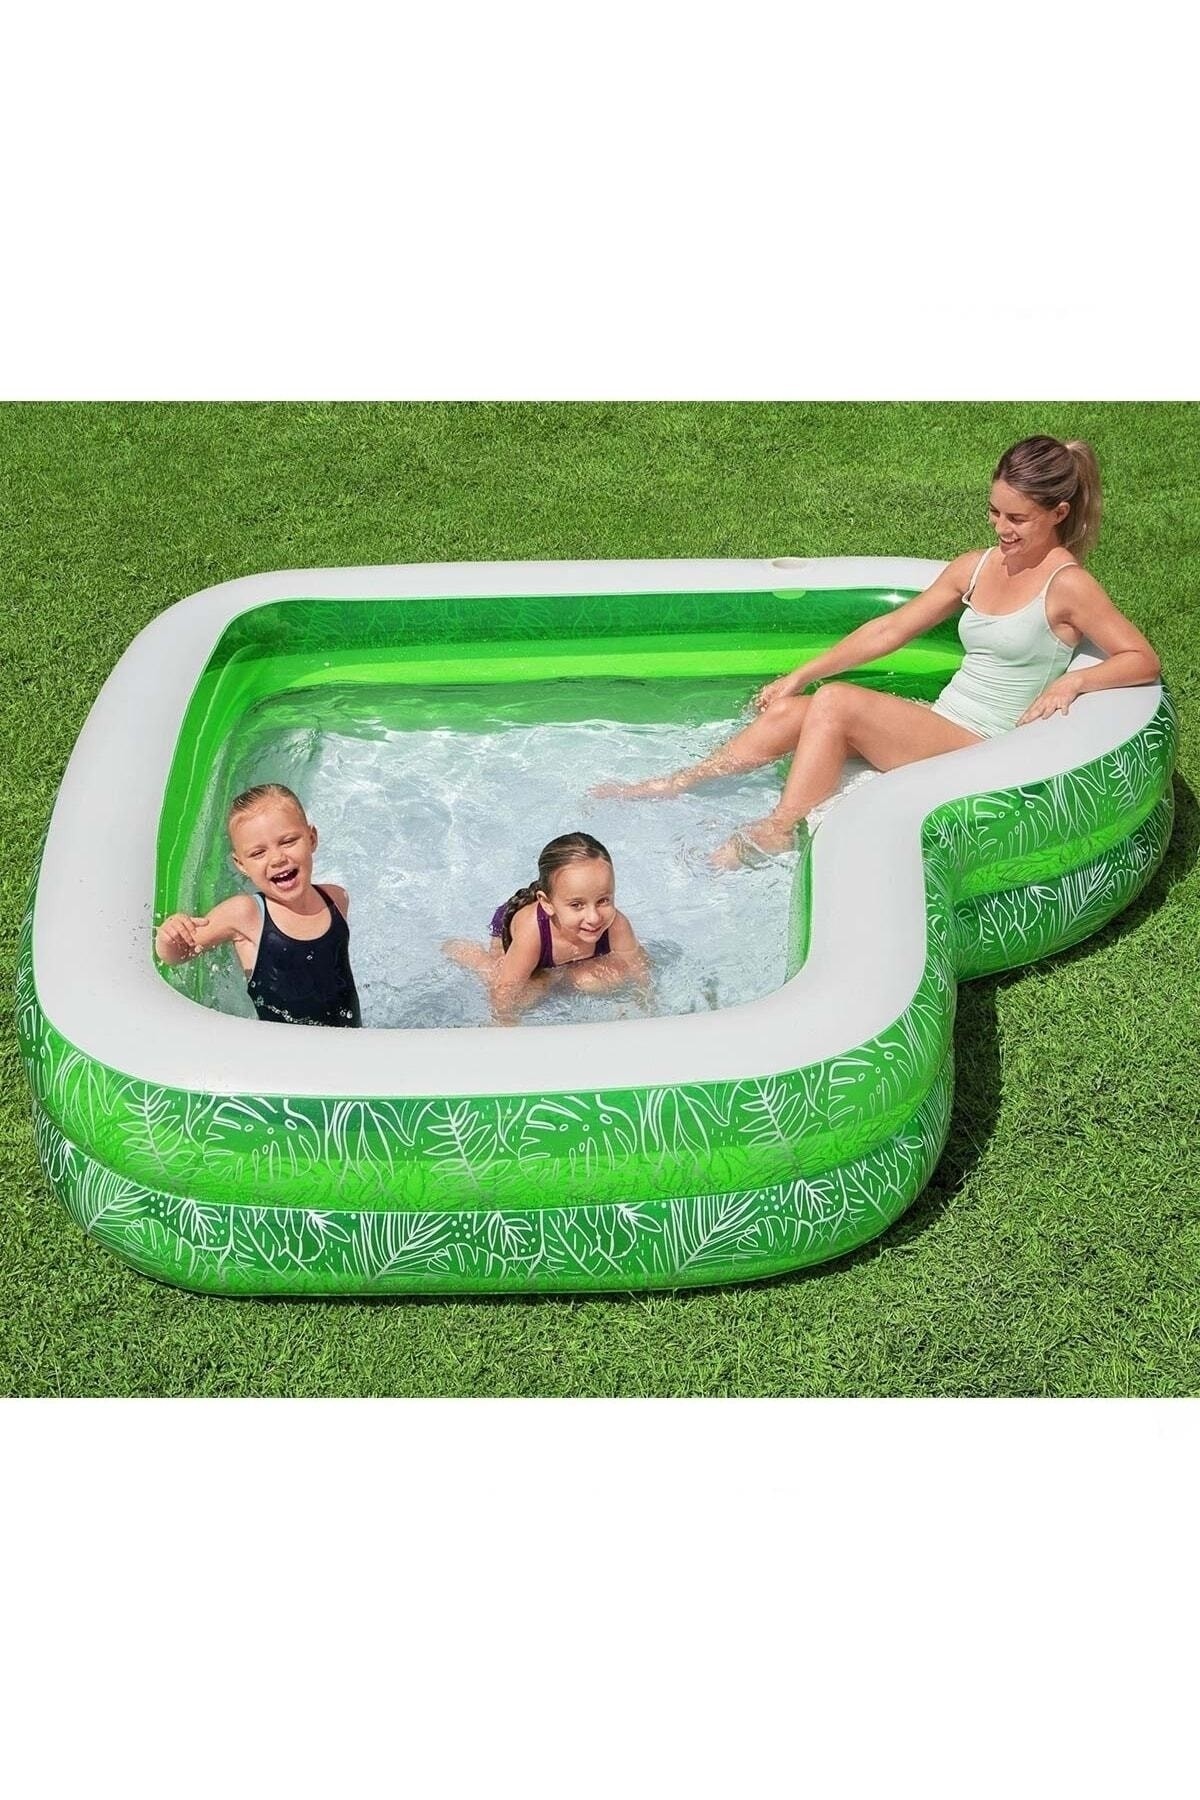 Visco Bestway Shaped Inflatable Family Pool 54336